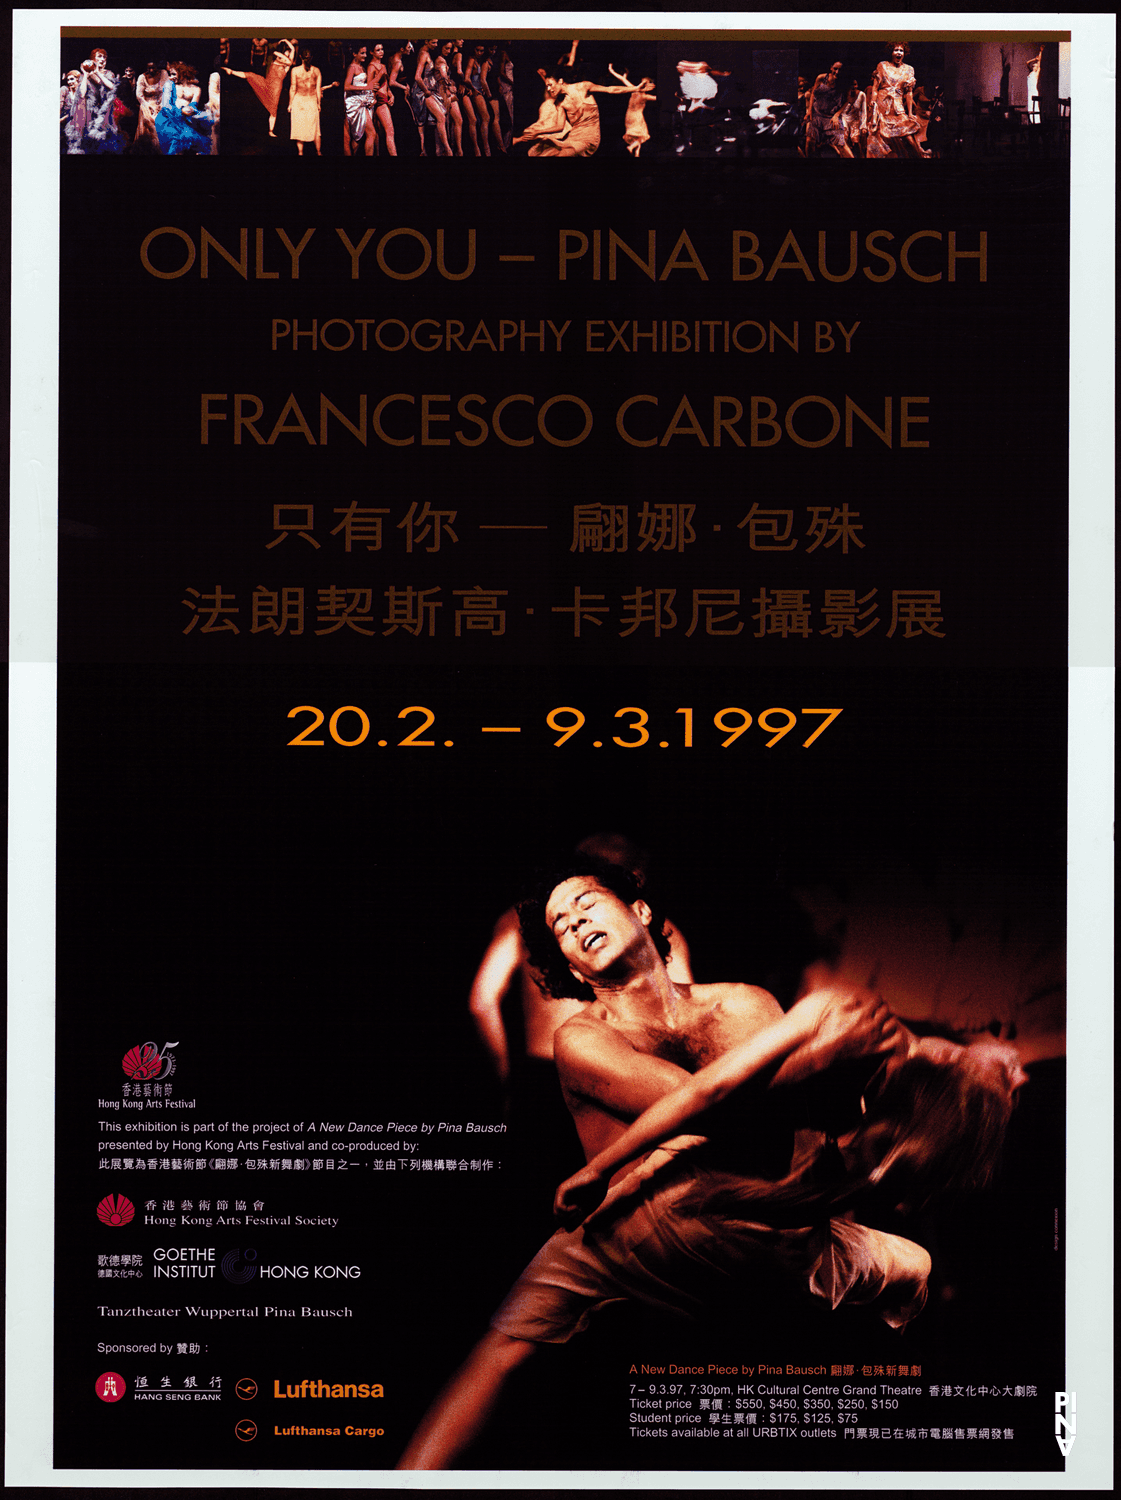 Poster for the photography exhibition “Only You – Pina Bausch“ by Franscesco Carbone in Hong Kong, 20.02–09.03.1997